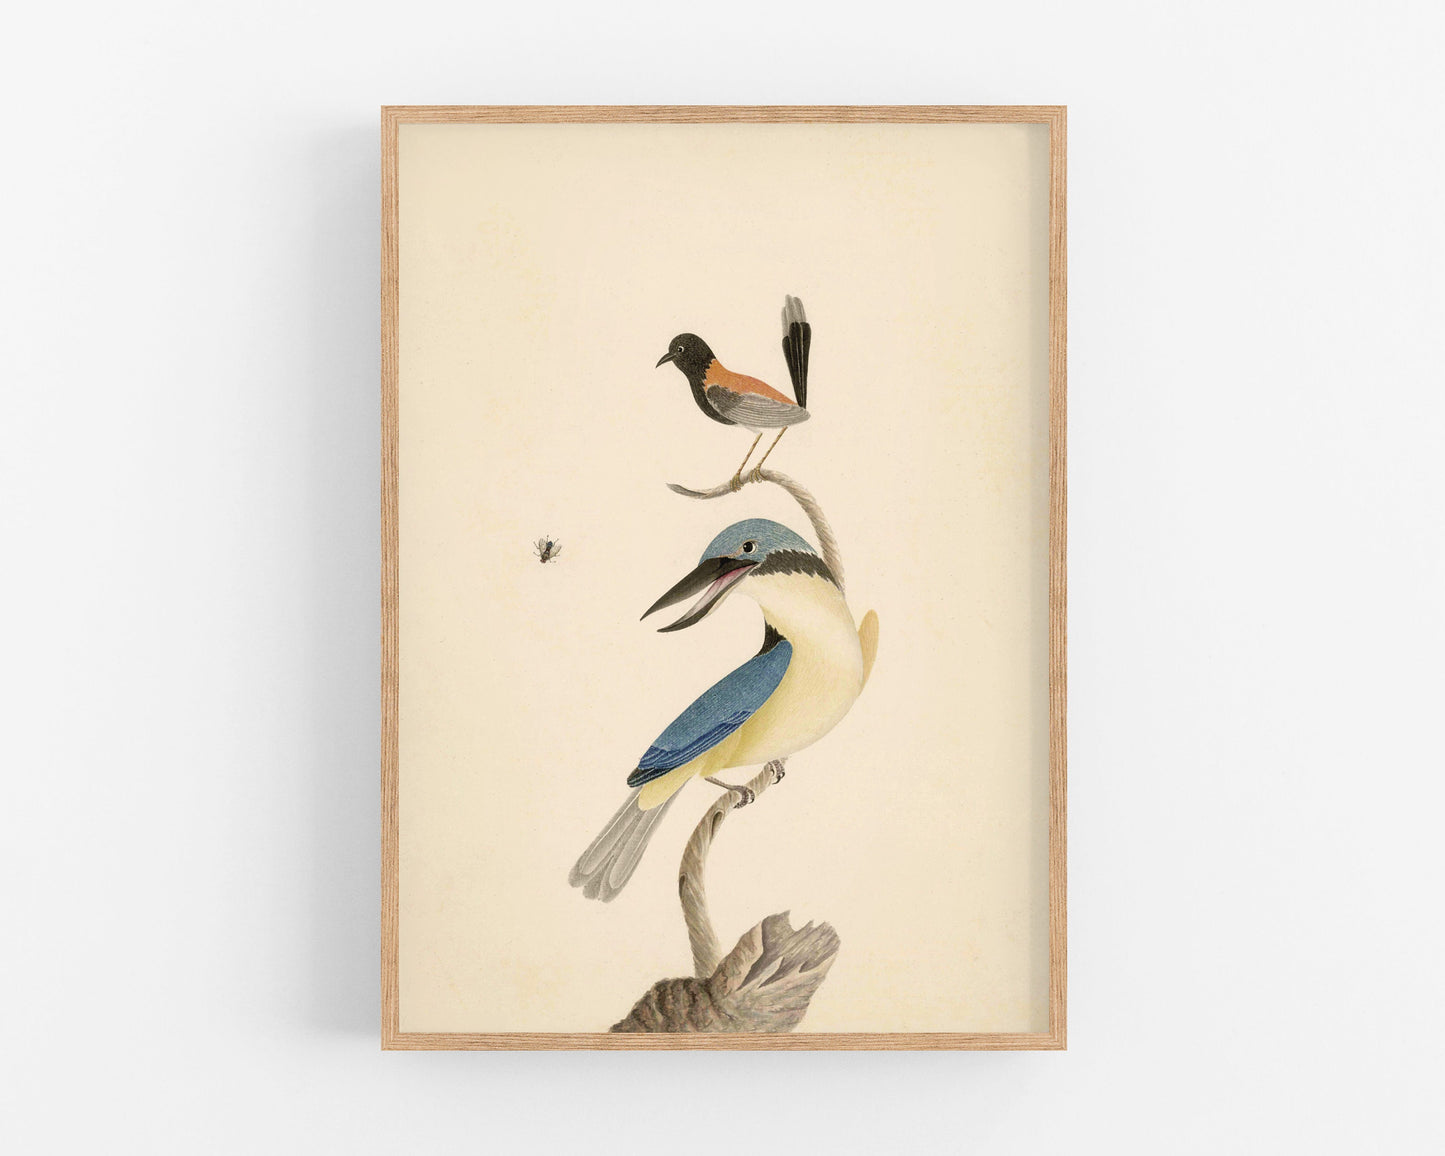 Antique wren, kingfisher and fly art | 18th century birds | Natural history | Animal wall decor | Modern vintage décor | Eco-friendly gift